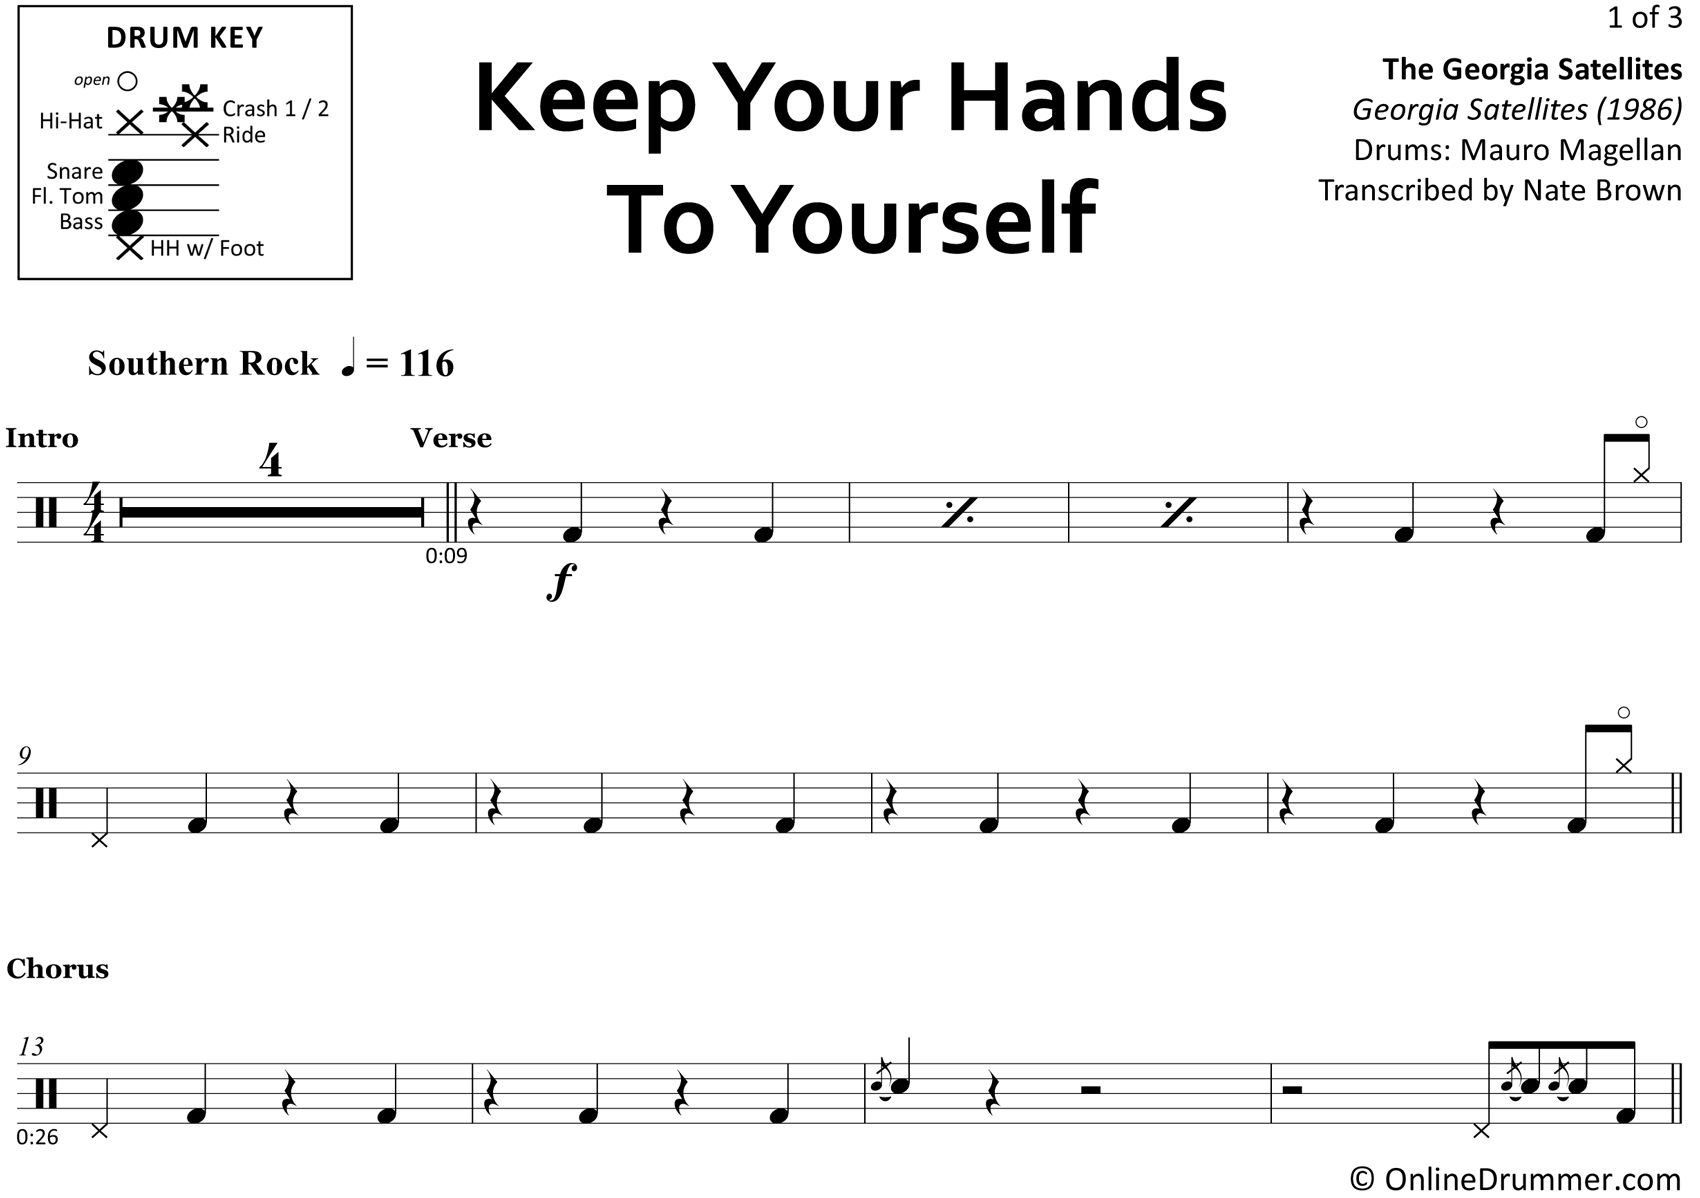 Keep Your Hands To Yourself - The Georgia Satellites - Drum Sheet Music